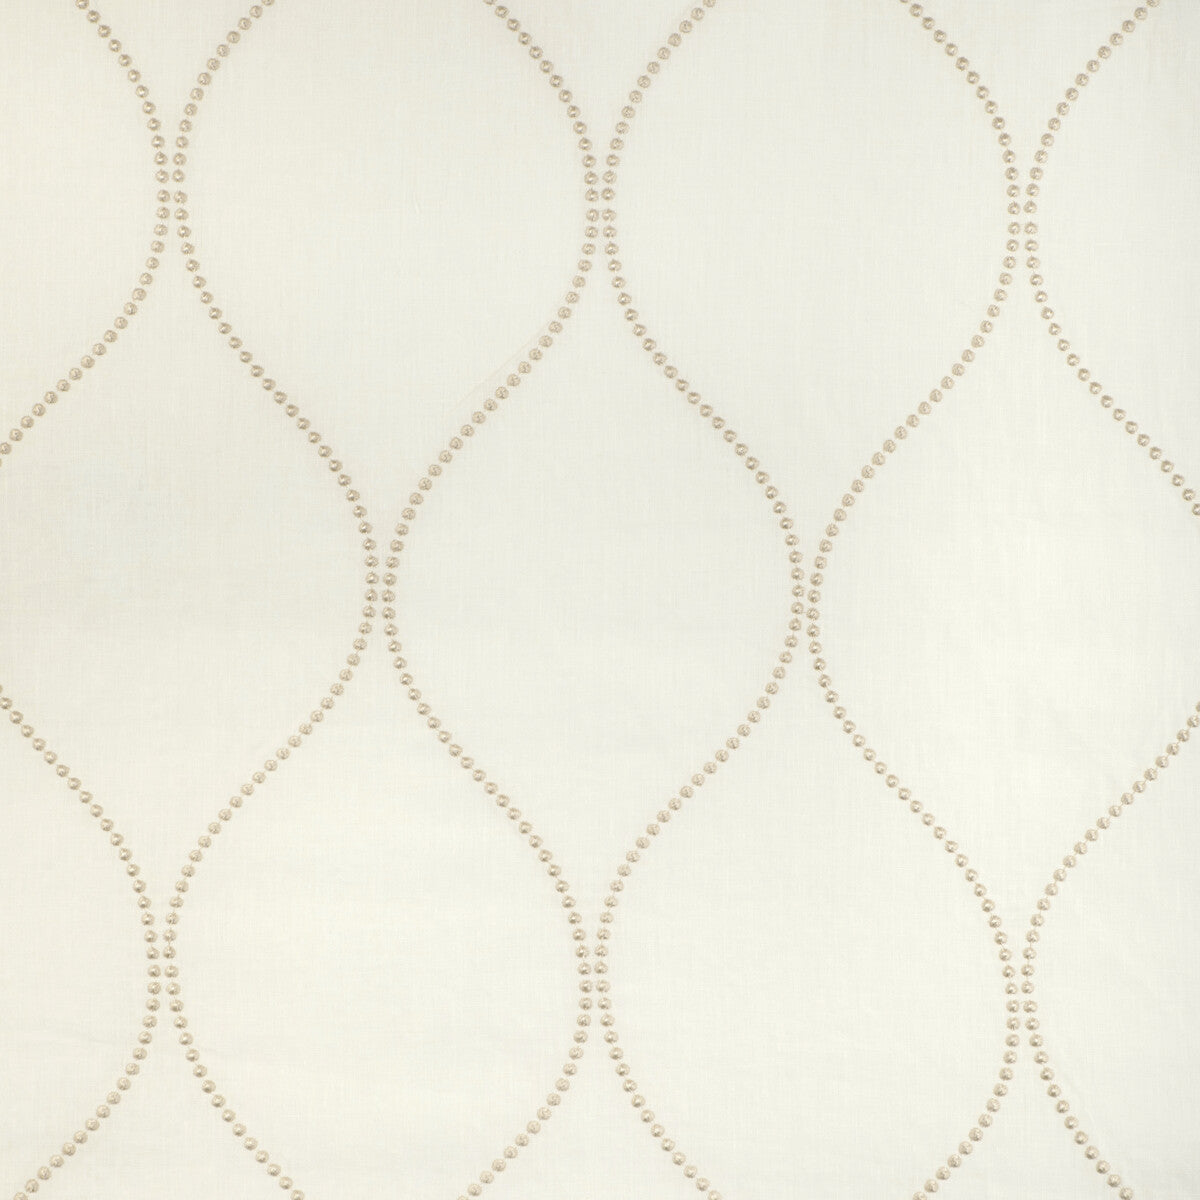 Kiley fabric in taupe color - pattern 4201.1101.0 - by Kravet Design in the Candice Olson collection